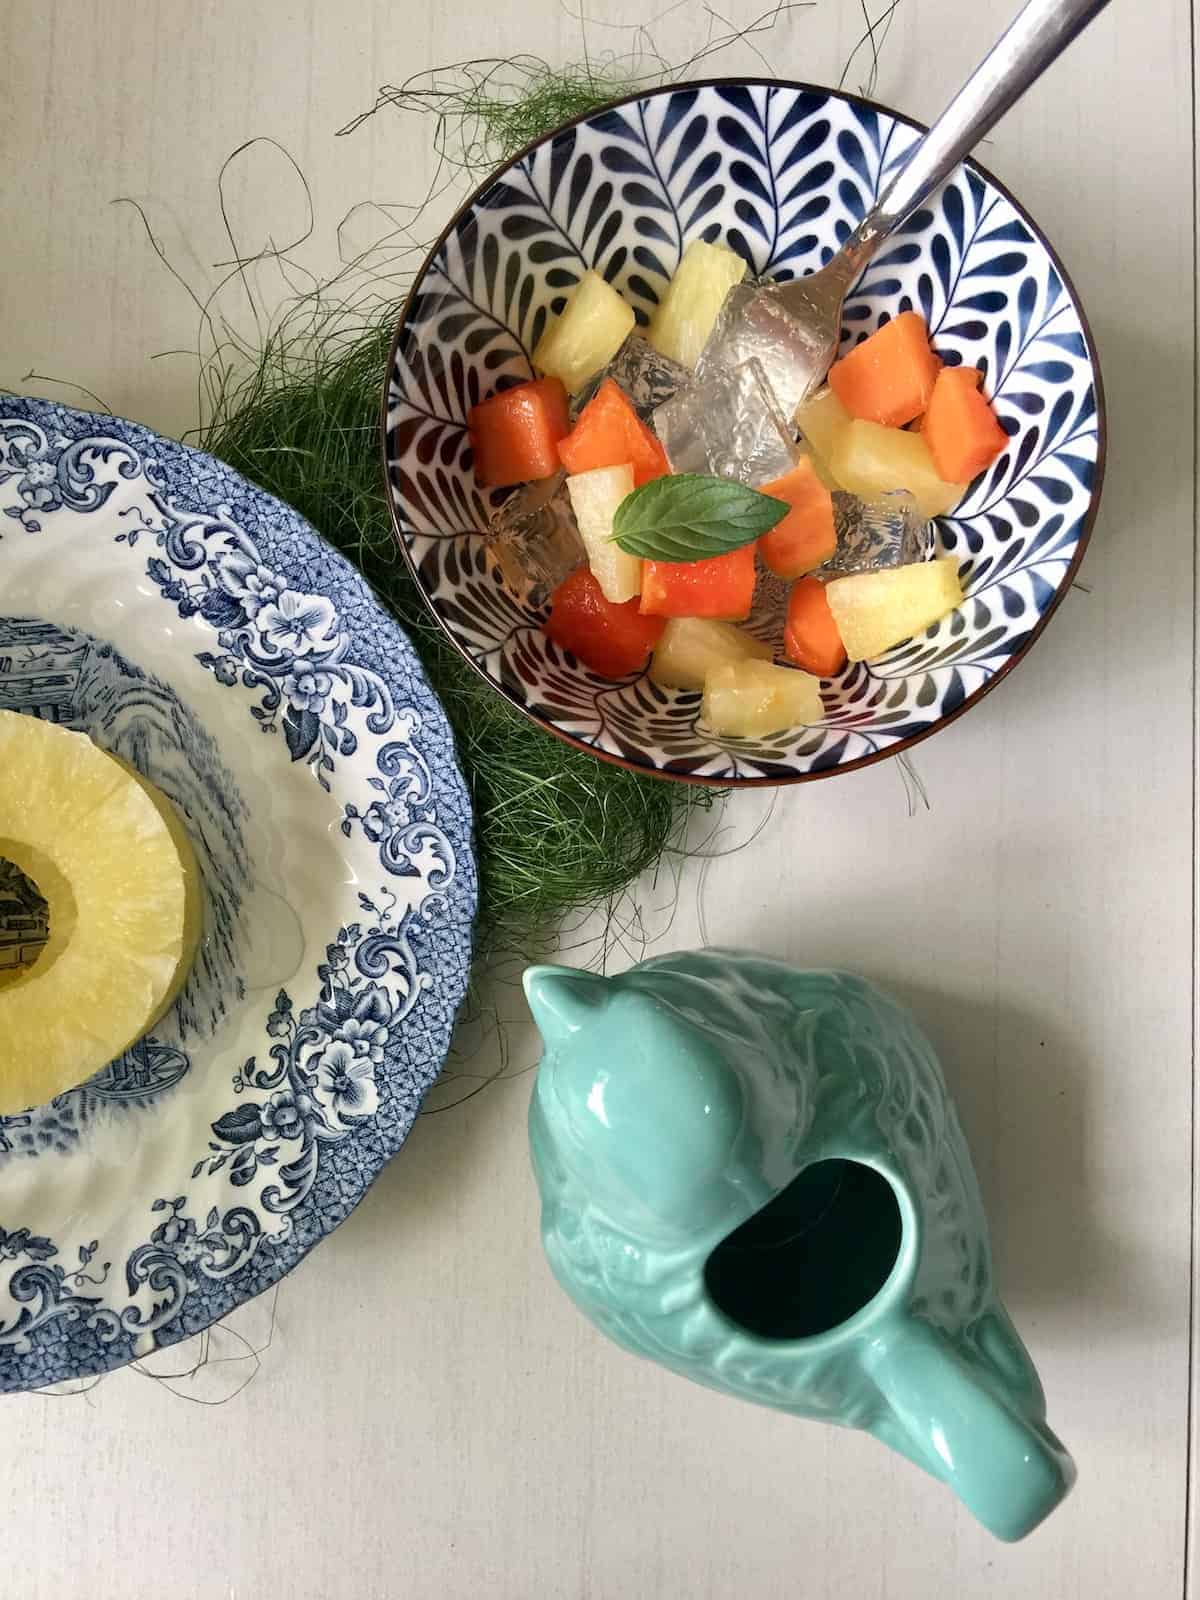 A bowl of fruits and Japanese jelly next to cut pineapple rounds